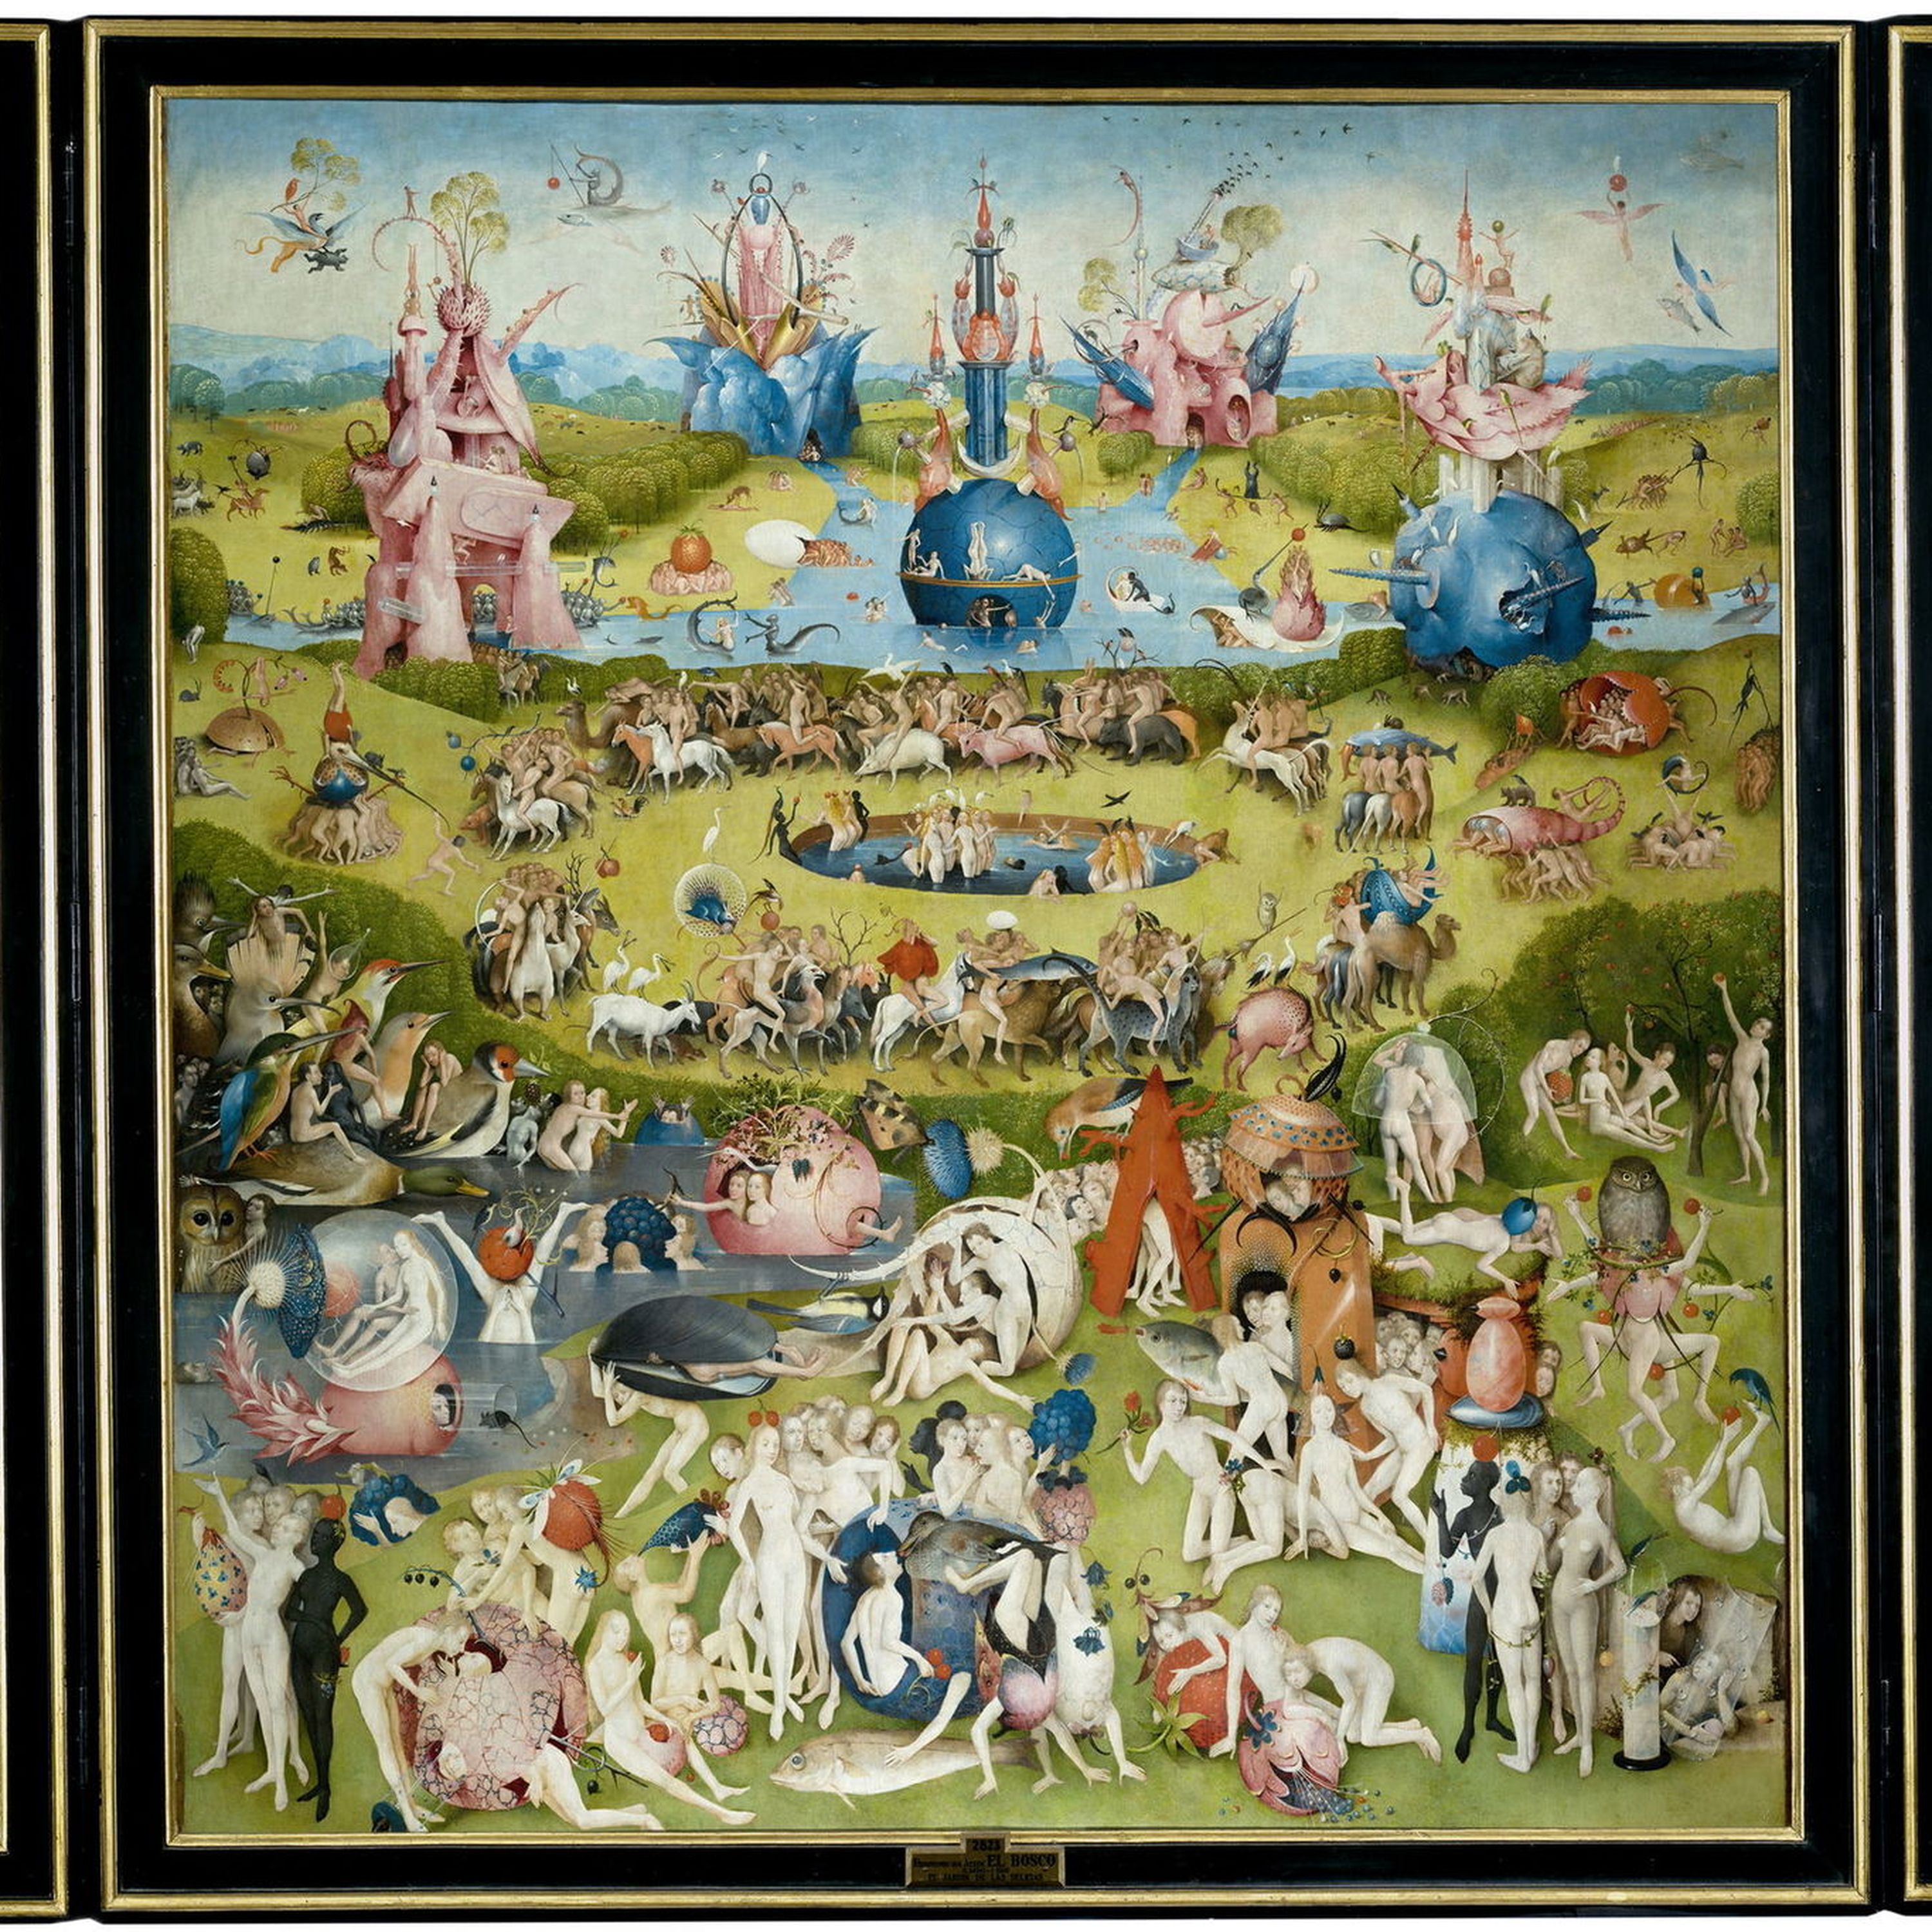 cover art for Garden of Earthly Delights by Hieronymous Bosch – with Waldemar Januszack